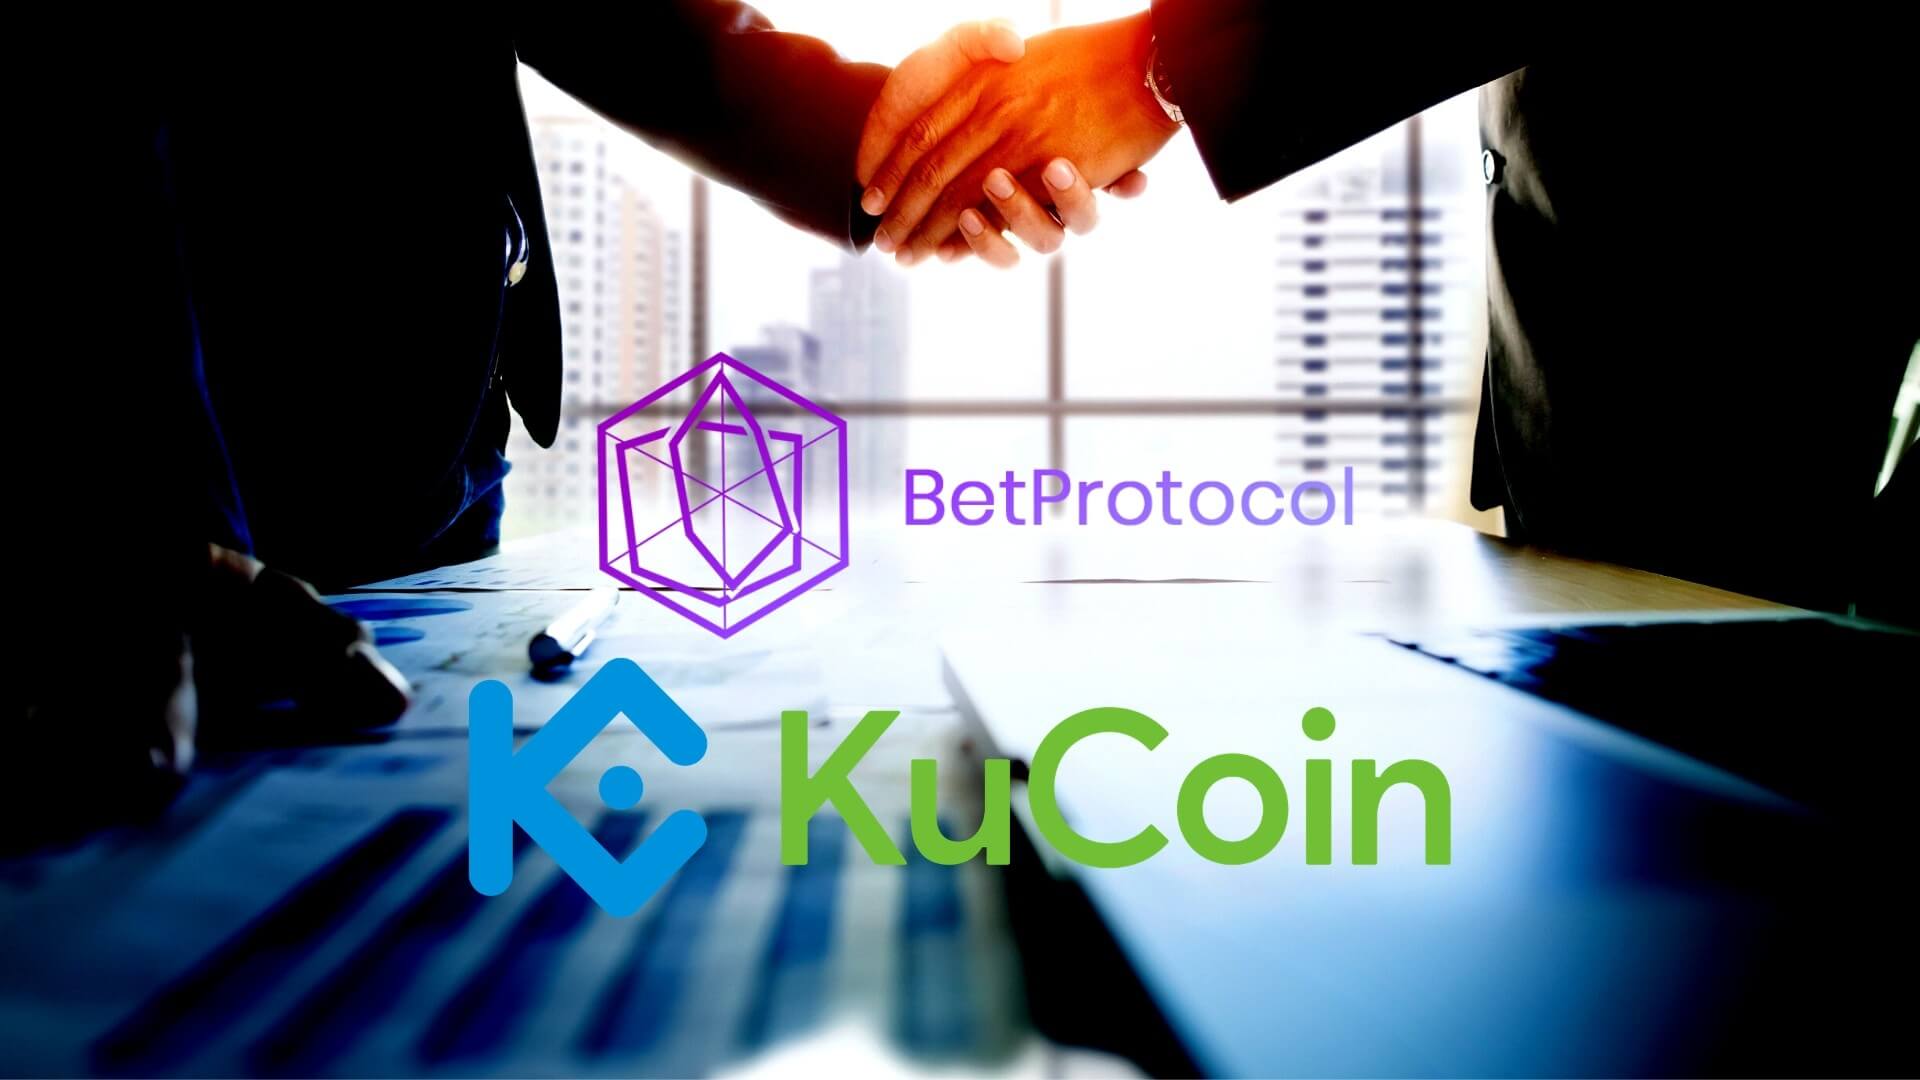 KuCoin and BetProtocol Partner To Enable Playing Games With KCS